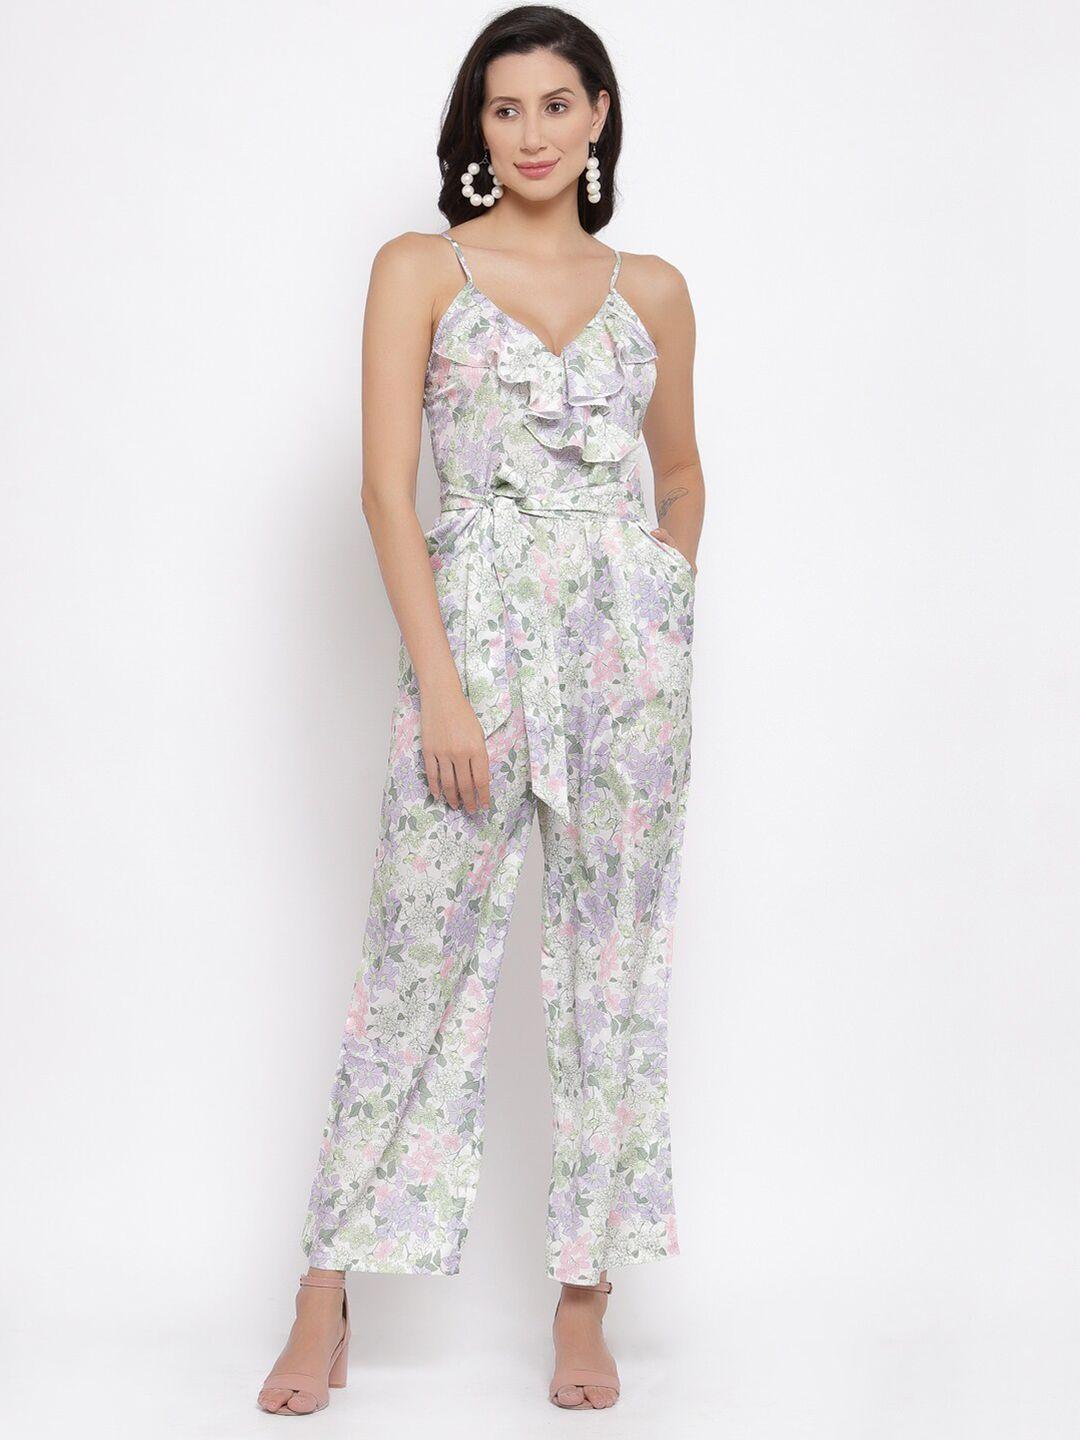 iki chic off white & green printed culotte jumpsuit with ruffles